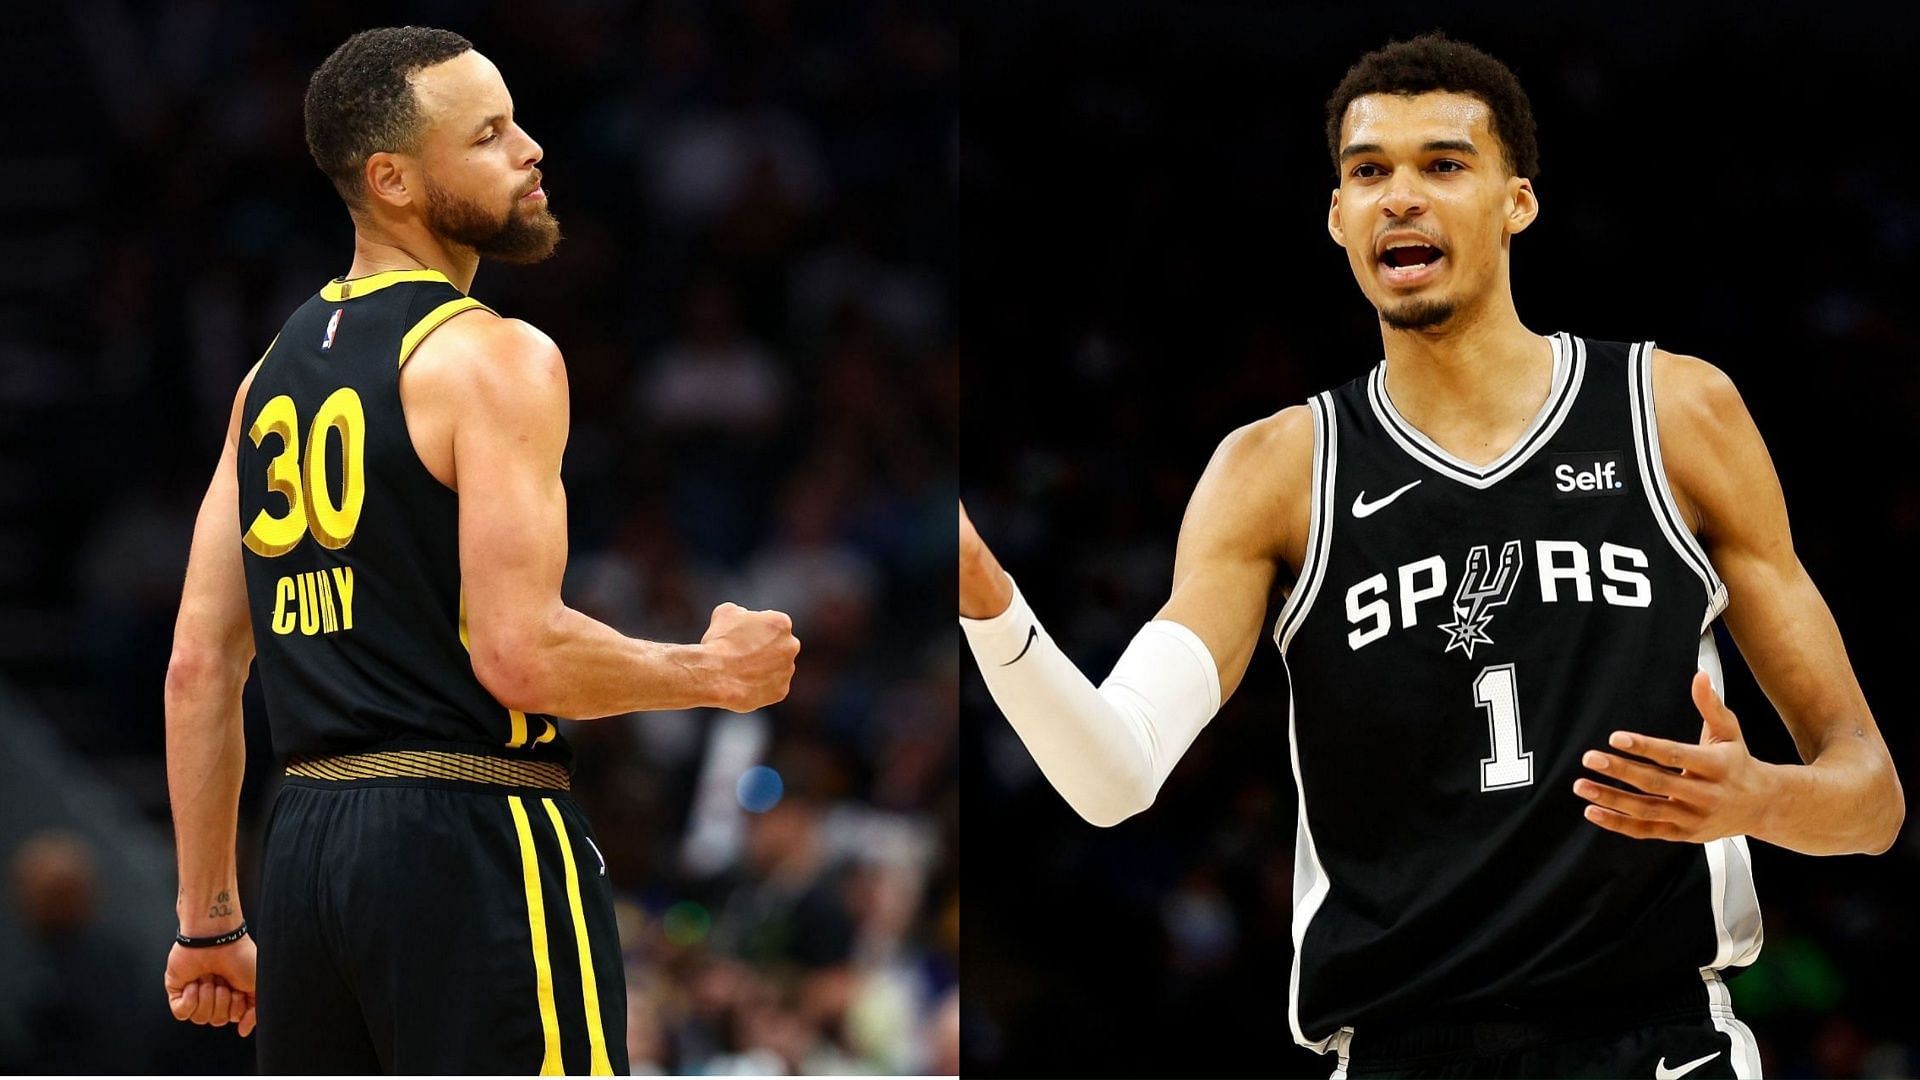 How to watch Golden State Warriors vs San Antonio Spurs NBA basketball game tonight?